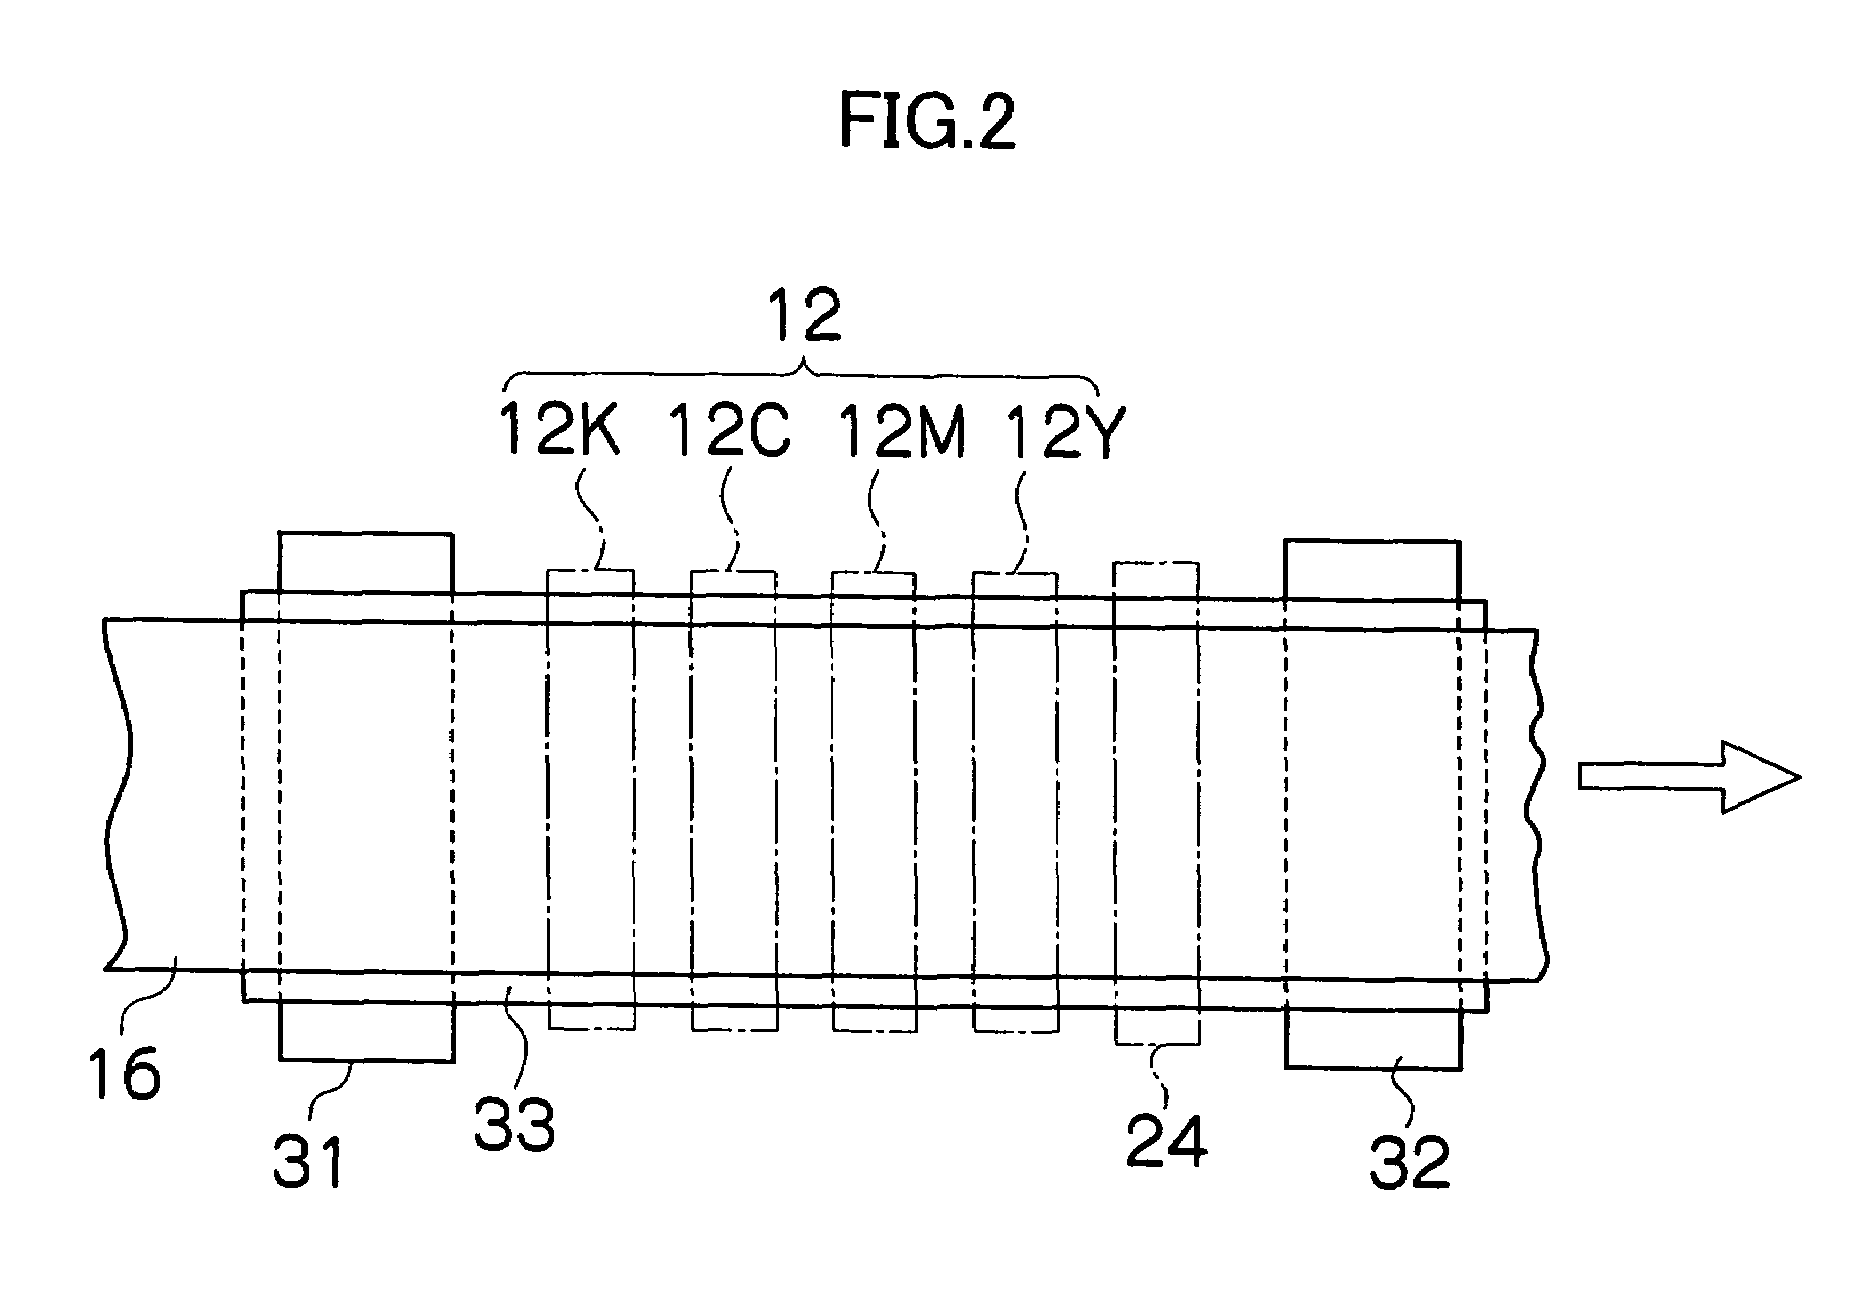 Inkjet recording apparatus and preliminary discharge control method